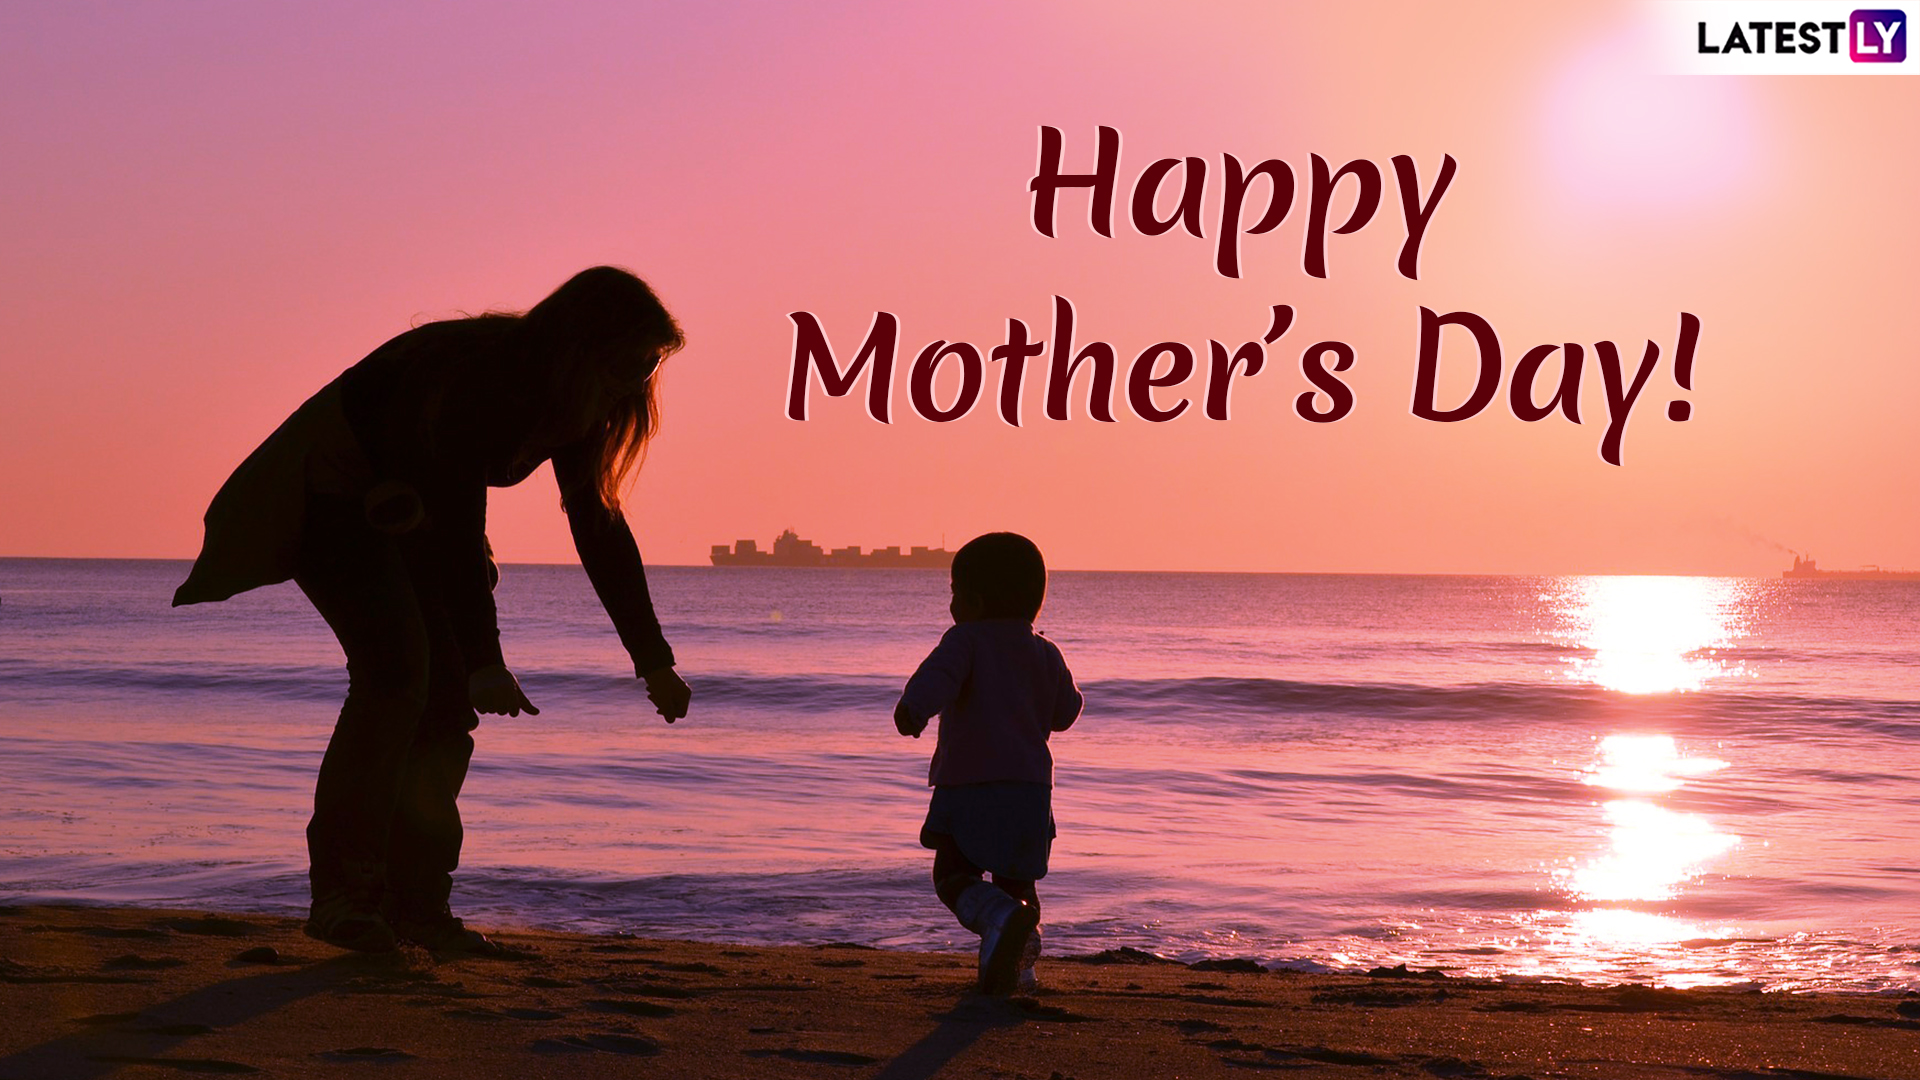 Mother's Day 2021 Messages From Son & Daughter: WhatsApp Stickers, HD Images,  SMS, Facebook Quotes, GIF Greetings to Celebrate Motherhood | 🙏🏻 LatestLY